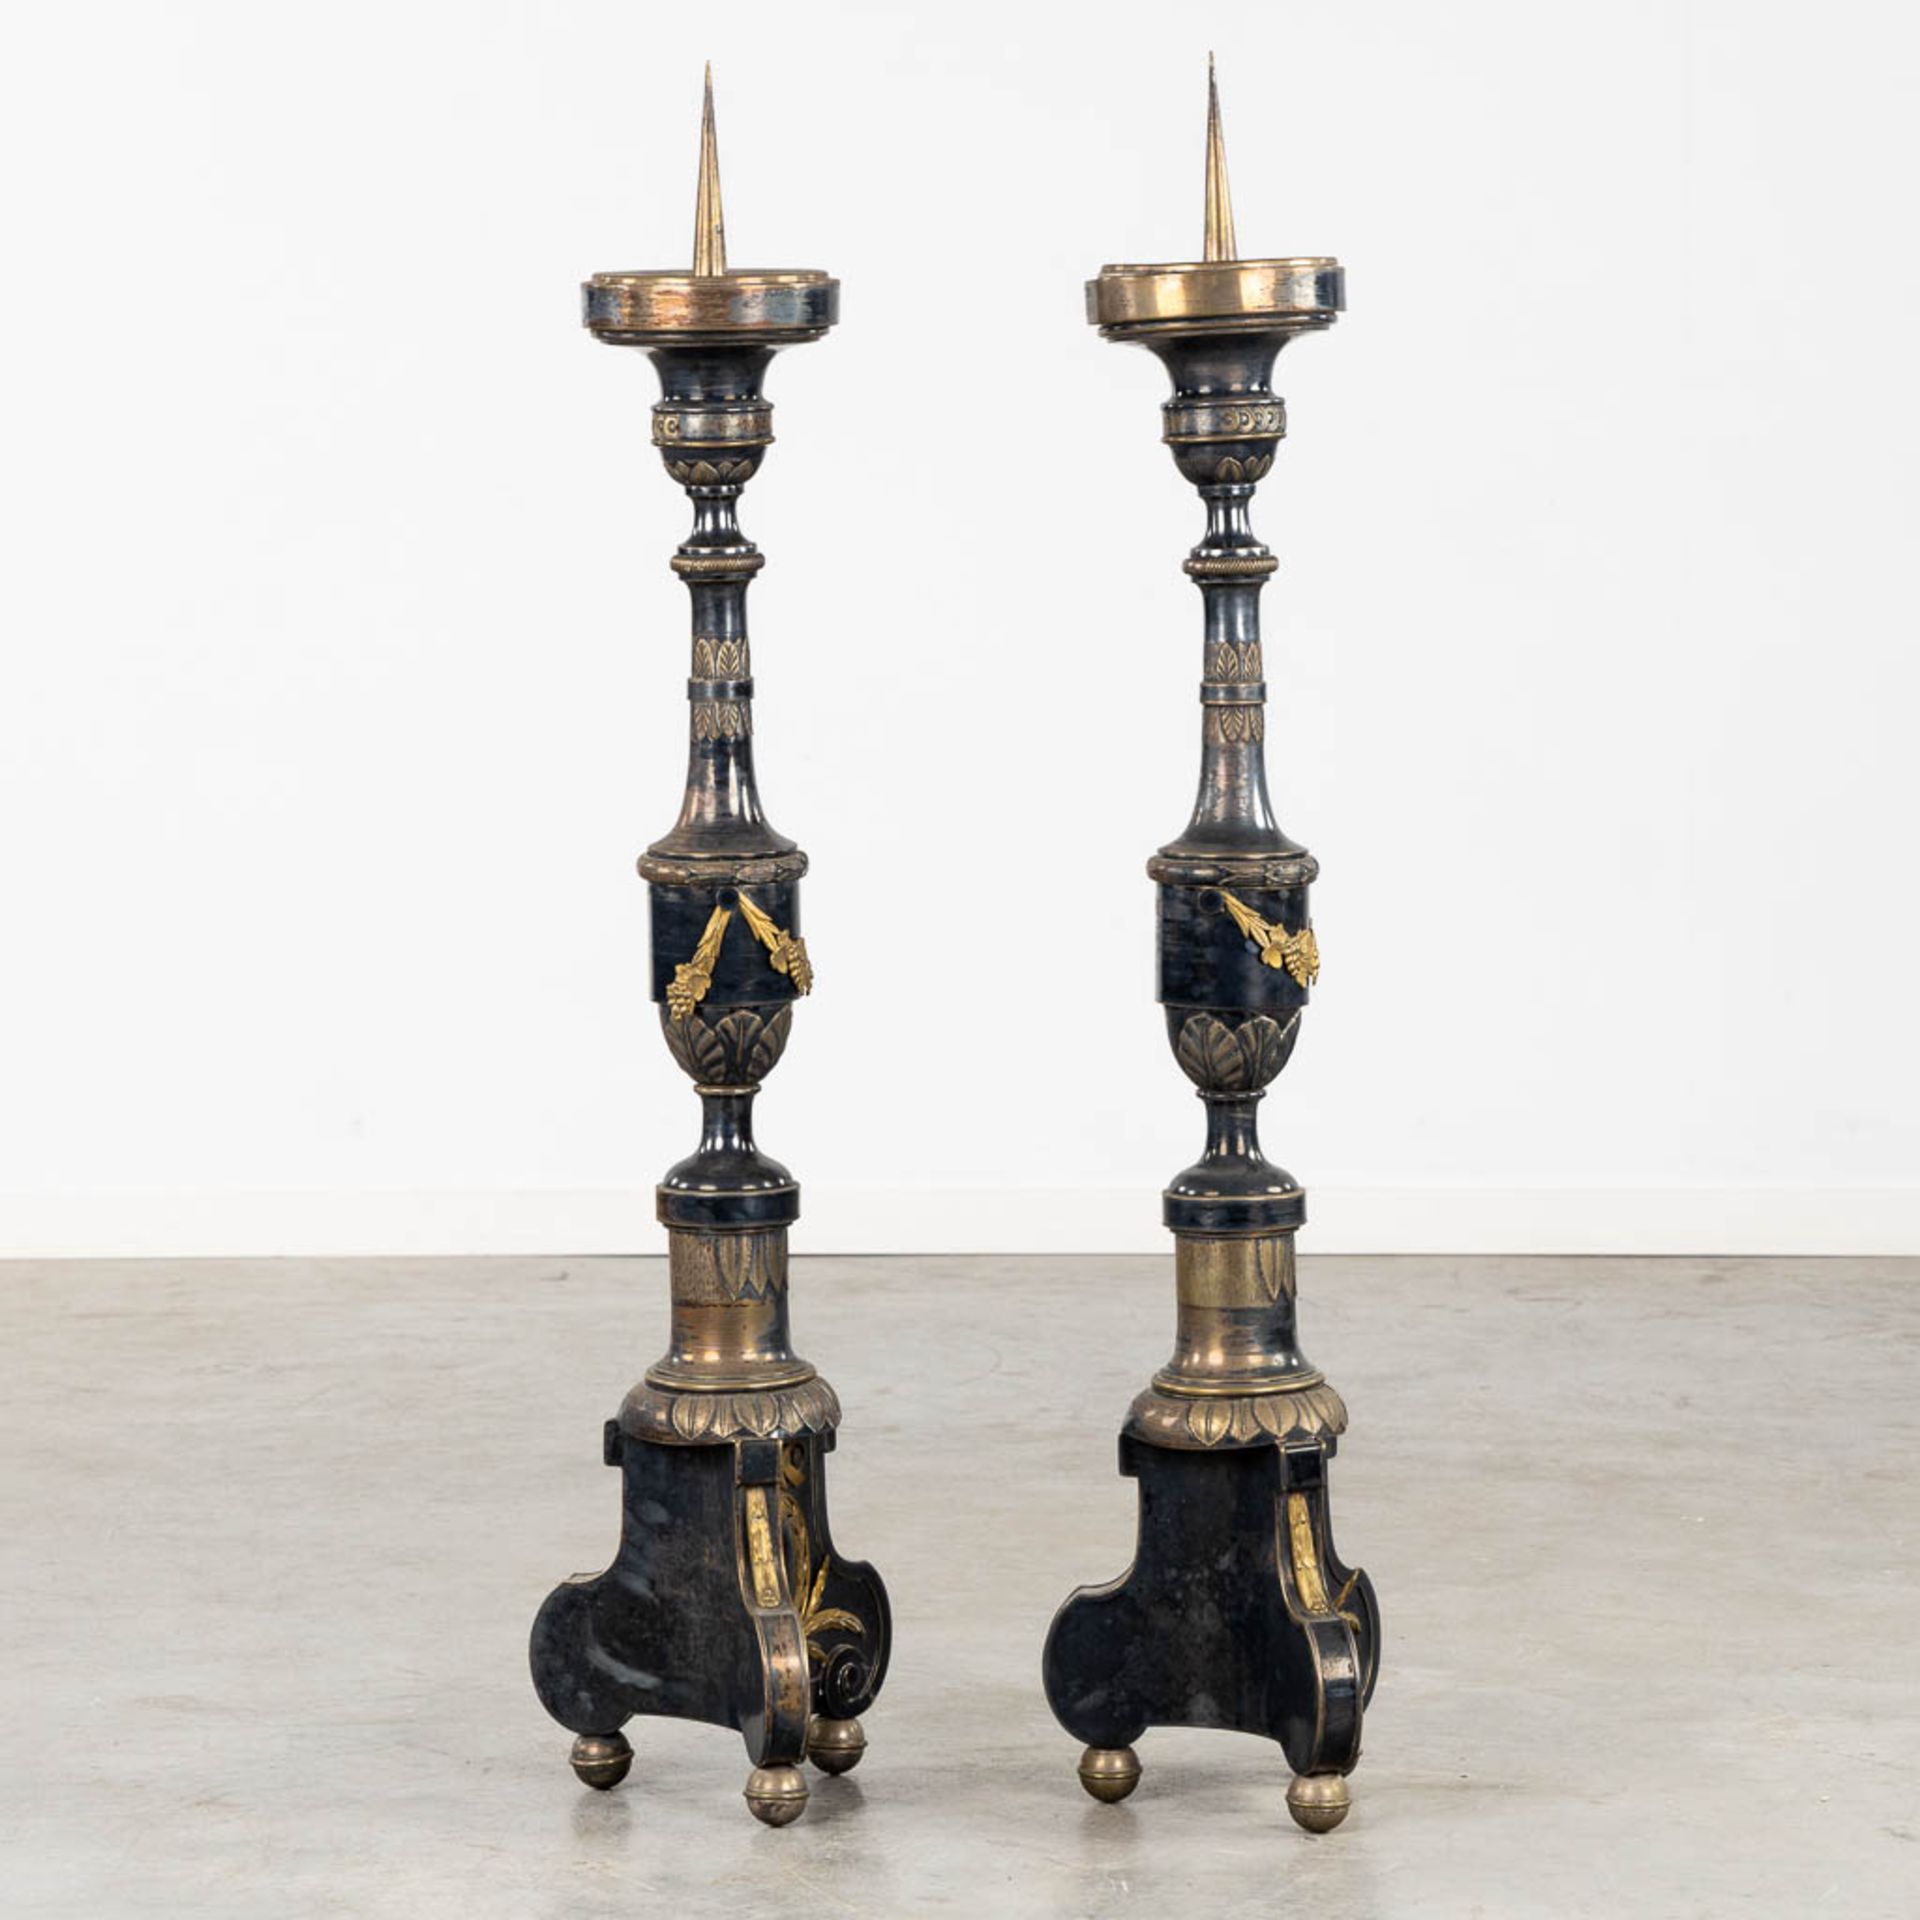 A pair of Church Candlesticks, silver- and gold-plated metal. 19th C. (H:120 cm) - Bild 3 aus 9